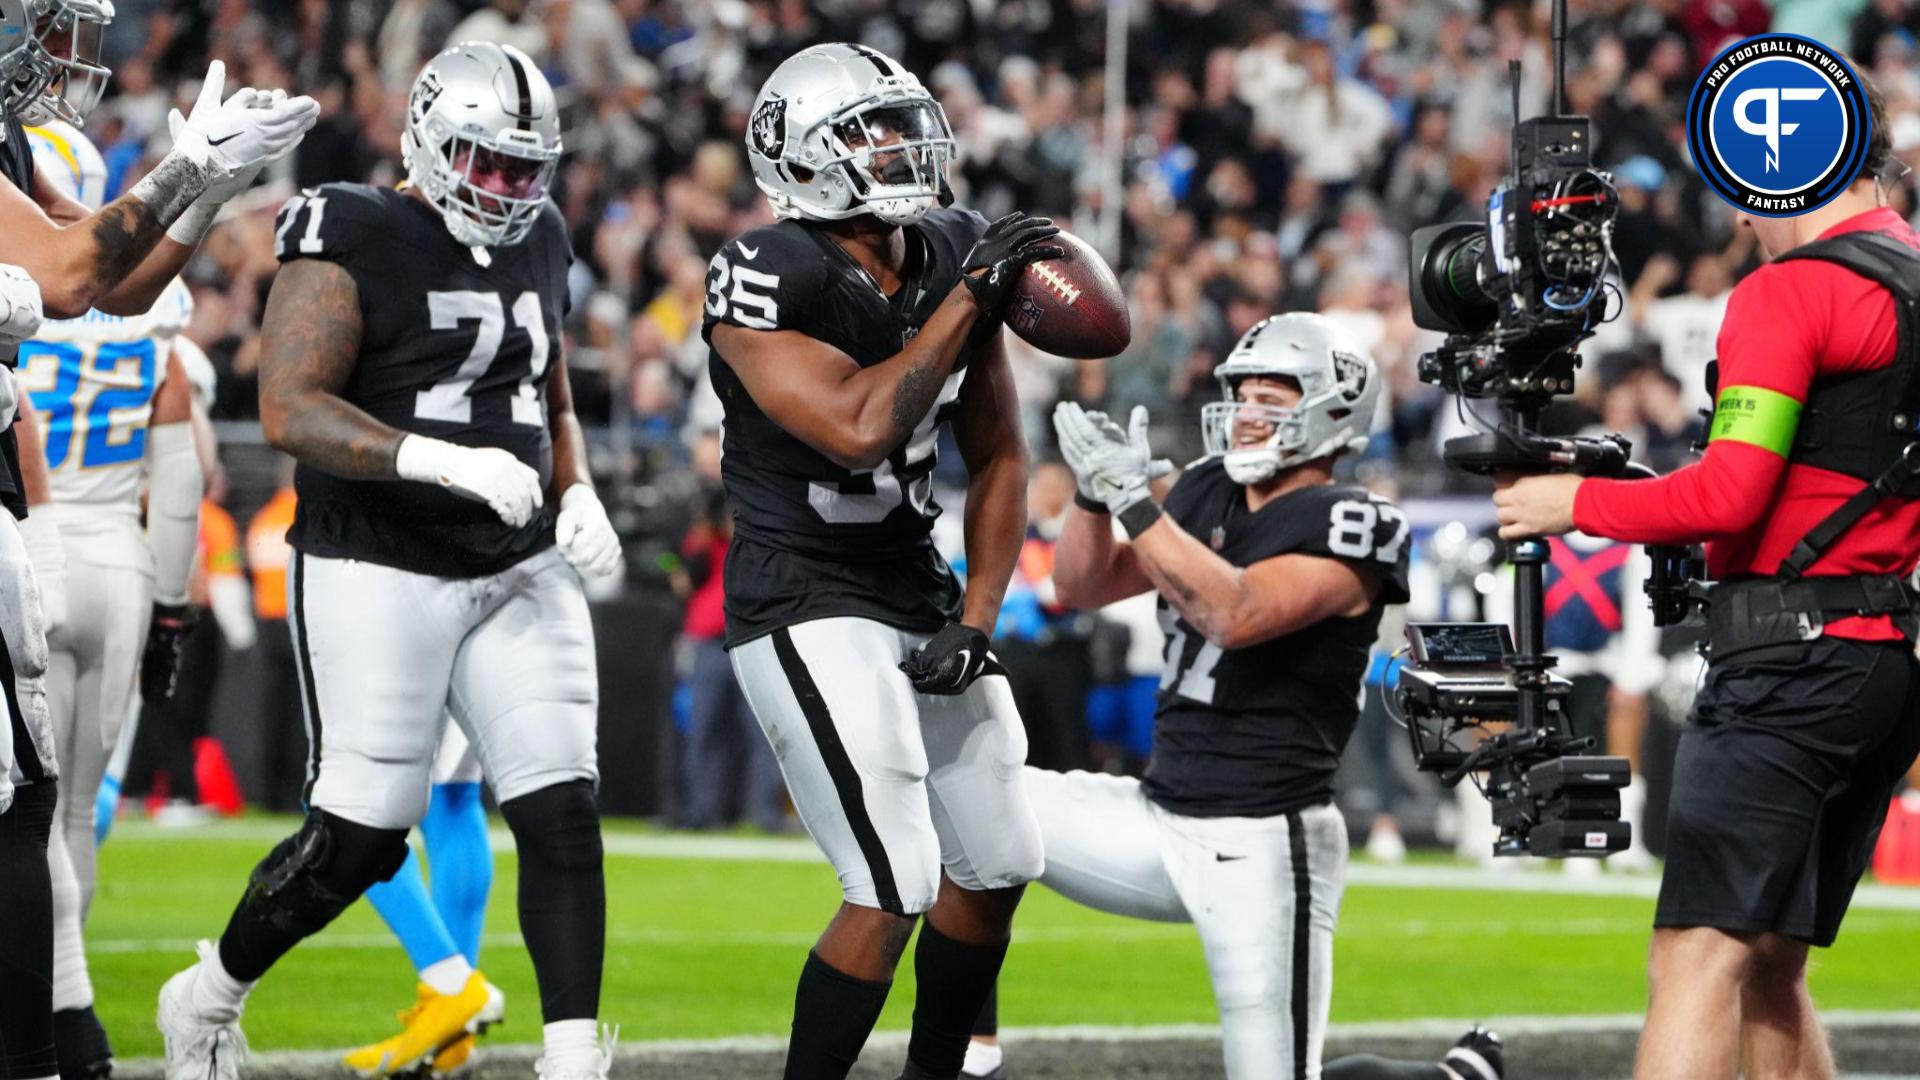 Las Vegas Raiders running back Zamir White (35) celebrates after scoring a touchdown against the Los Angeles Chargers in the first quarter at Allegiant Stadium.